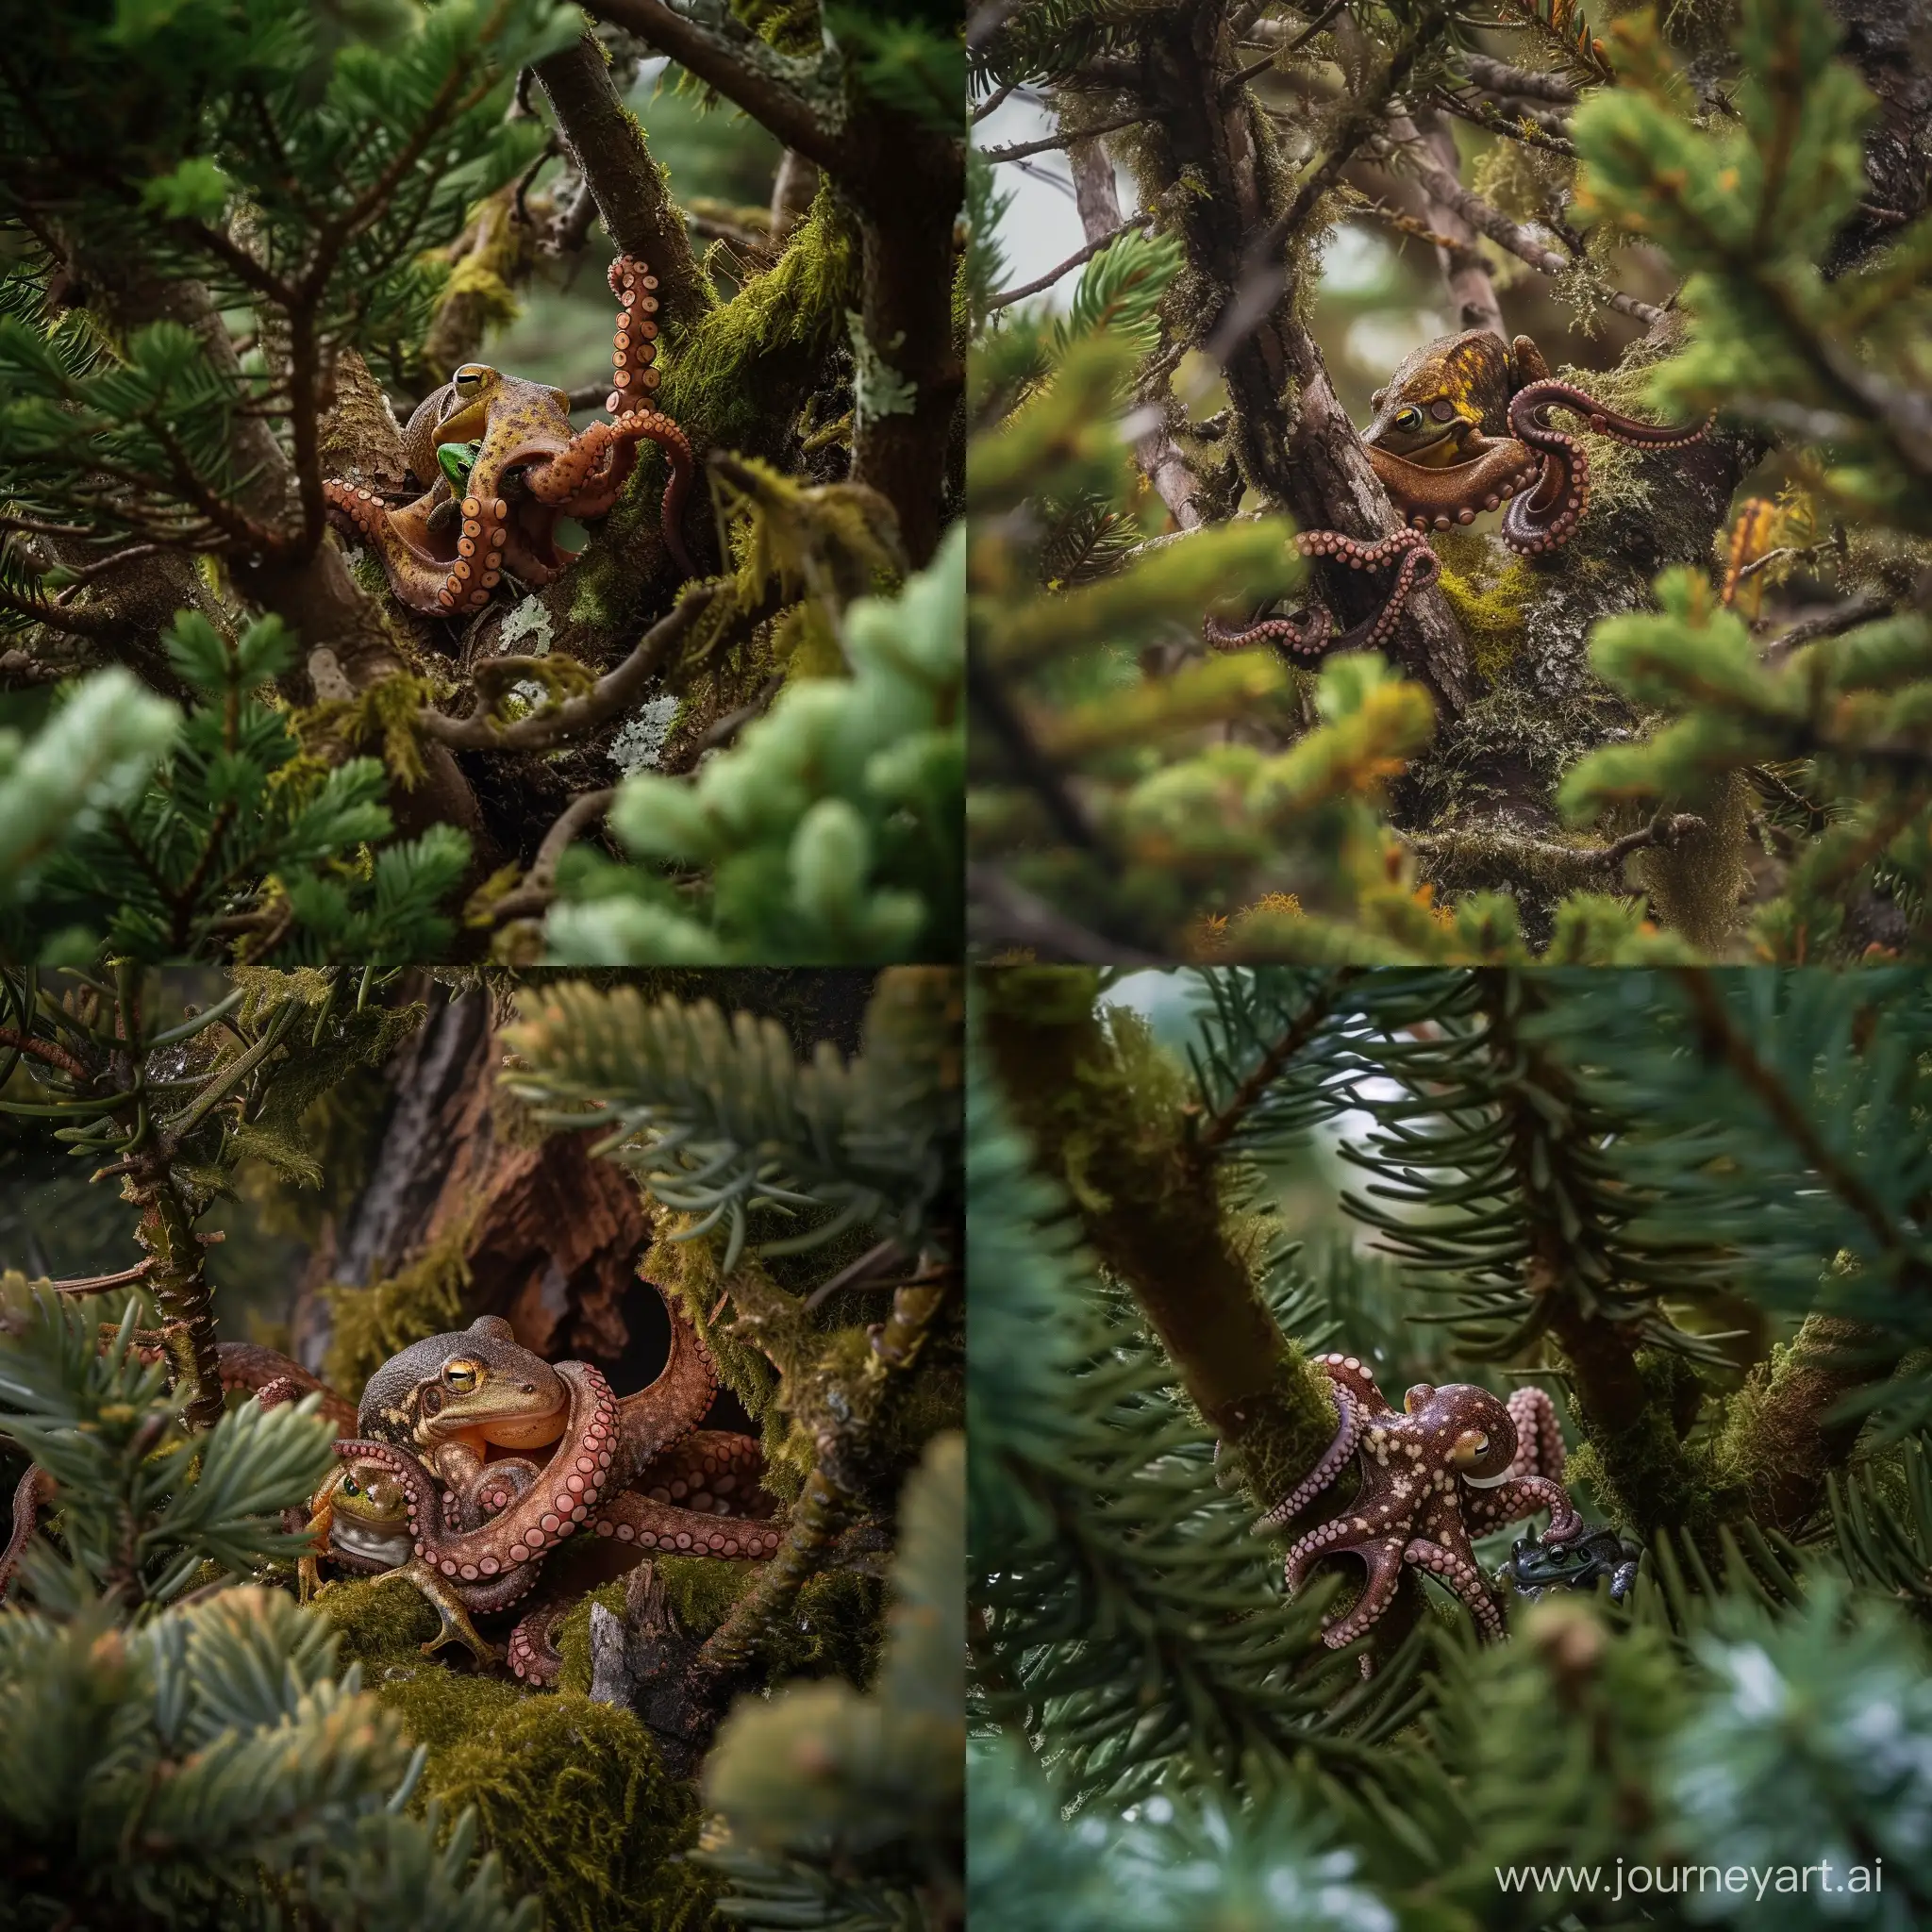 Enchanting-Forest-Encounter-Octopus-Feasting-on-Pacific-Tree-Frog-Amidst-Pine-Branches